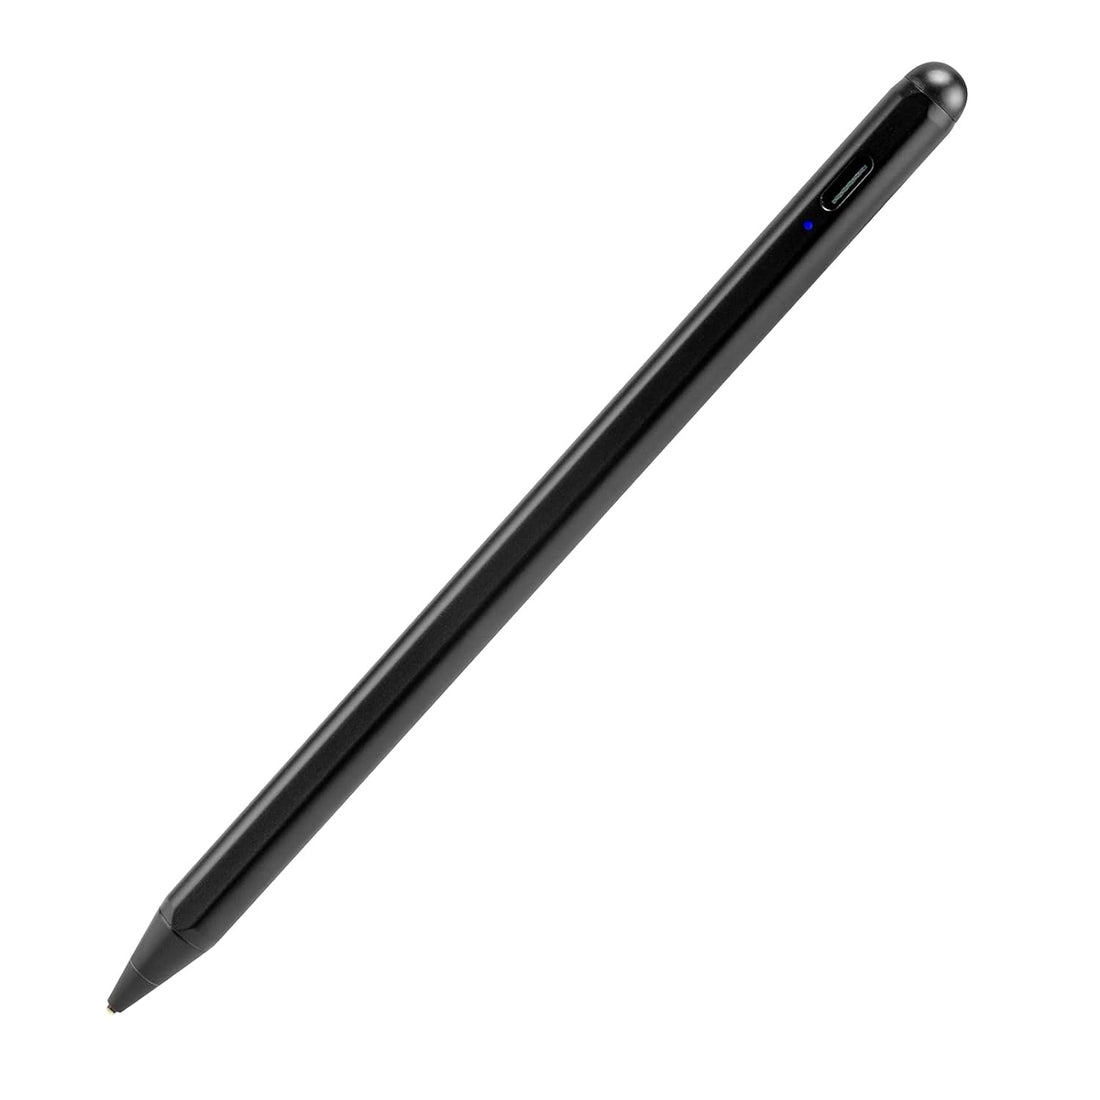 Stylus Pen for HP Envy X360 Convertible 2-in-1 Laptop (15.6") Pencil,Active Digital Touch-Control and Type-C Rechargeable Pen for HP Envy X360 15.6" ,High Precision Fine Tip,Good at Drawing,Black